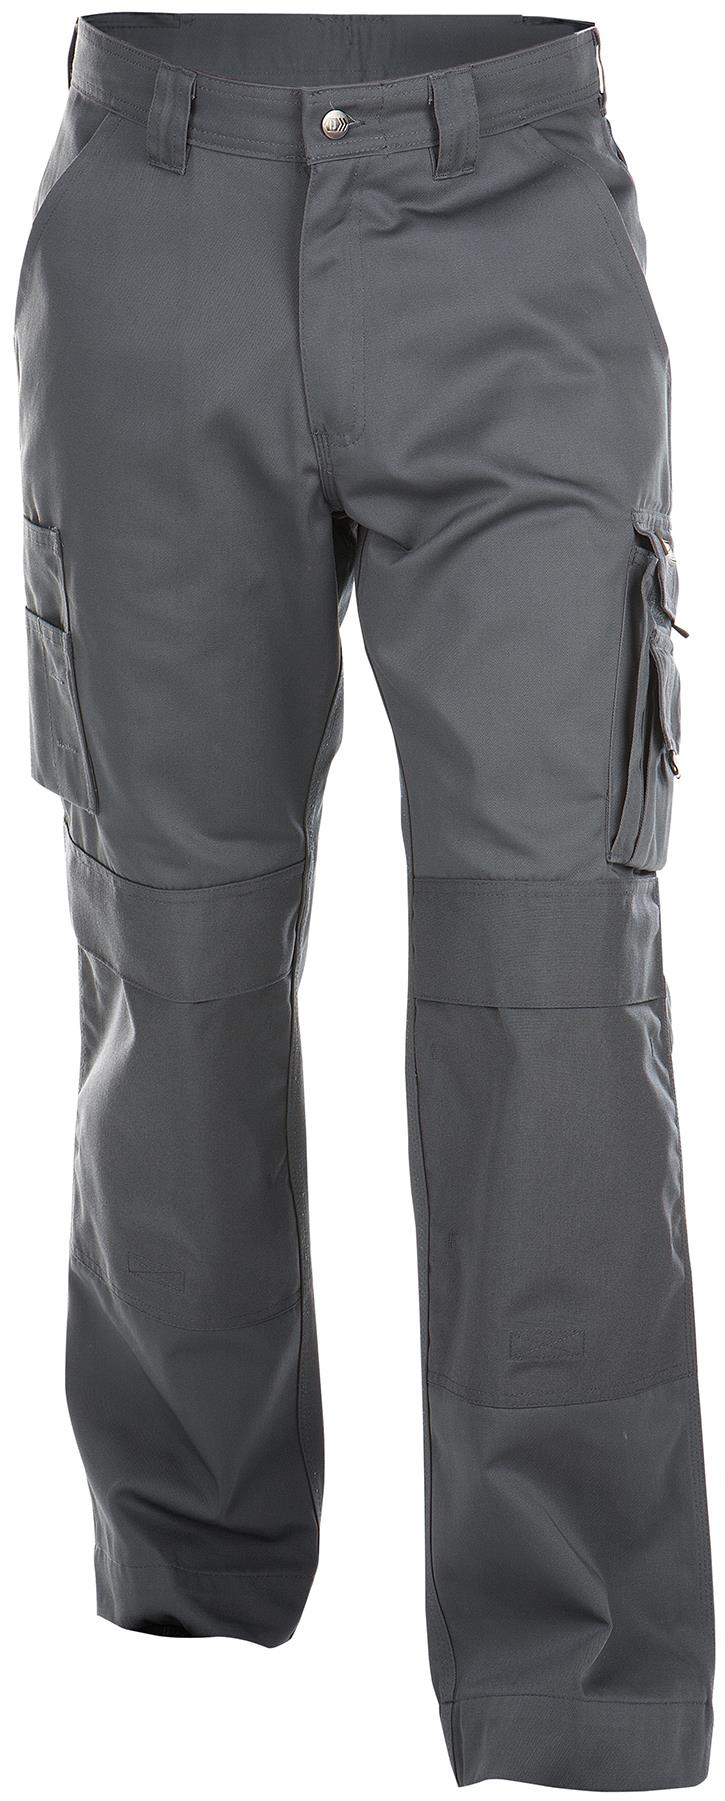 Snickers Lightweight Summer Work Trousers with Kneepad and Holster  Pockets3211  eBay